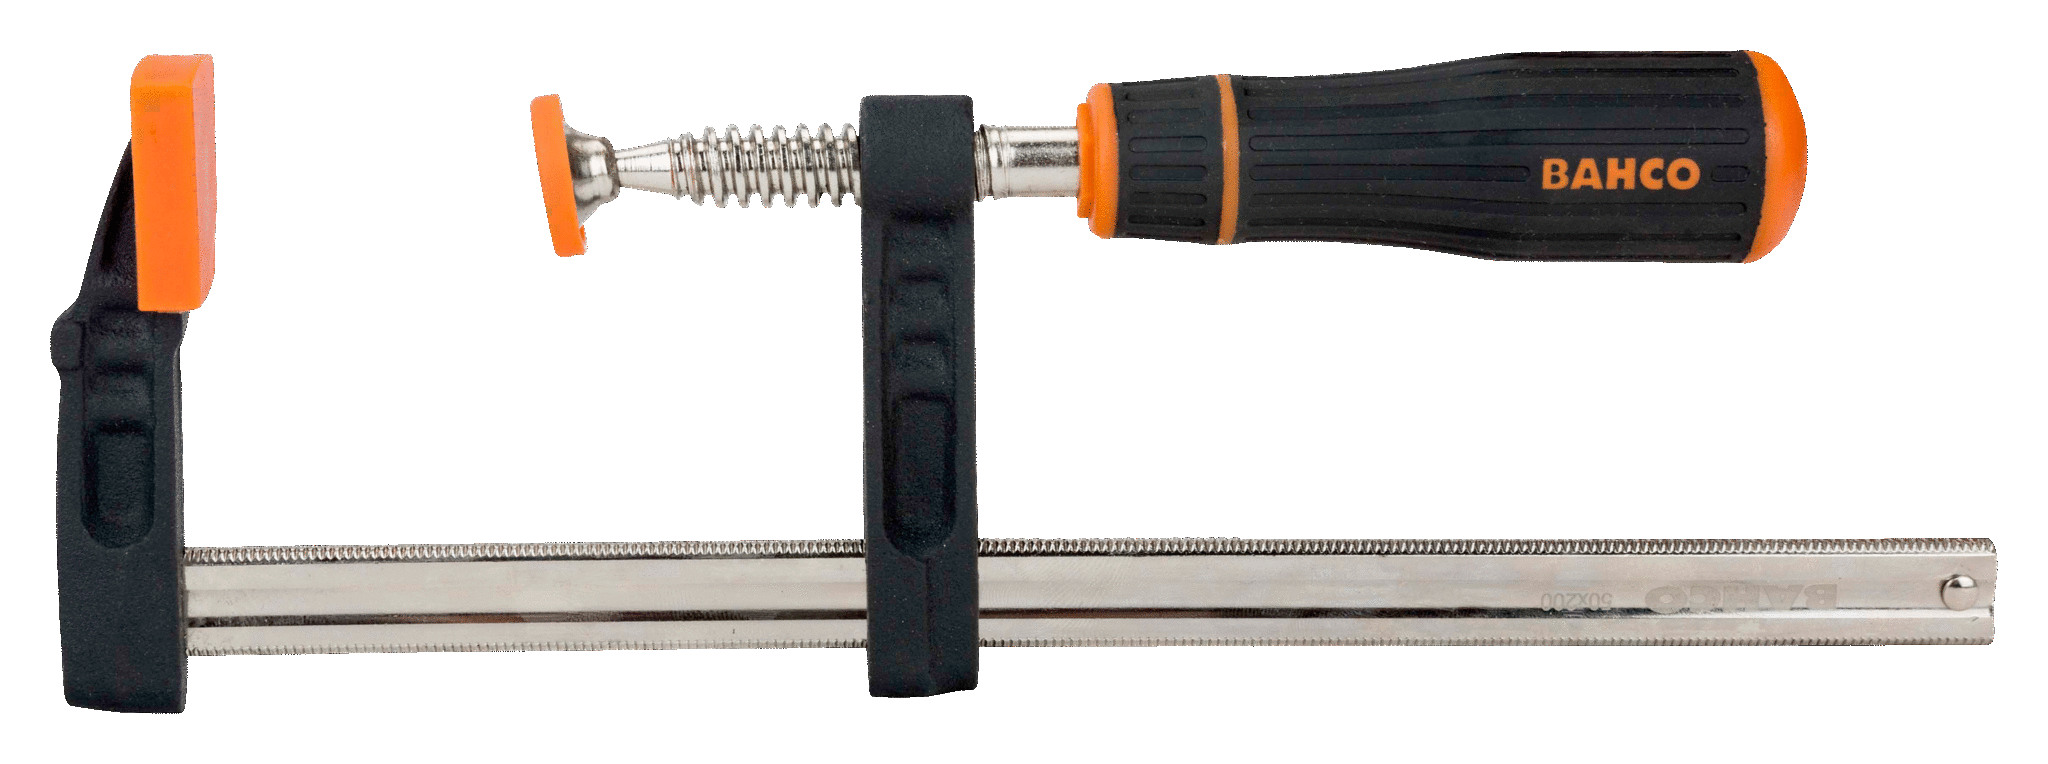 F-Clamps with Rubberised Handle - 420SH-120-600 by Bahco